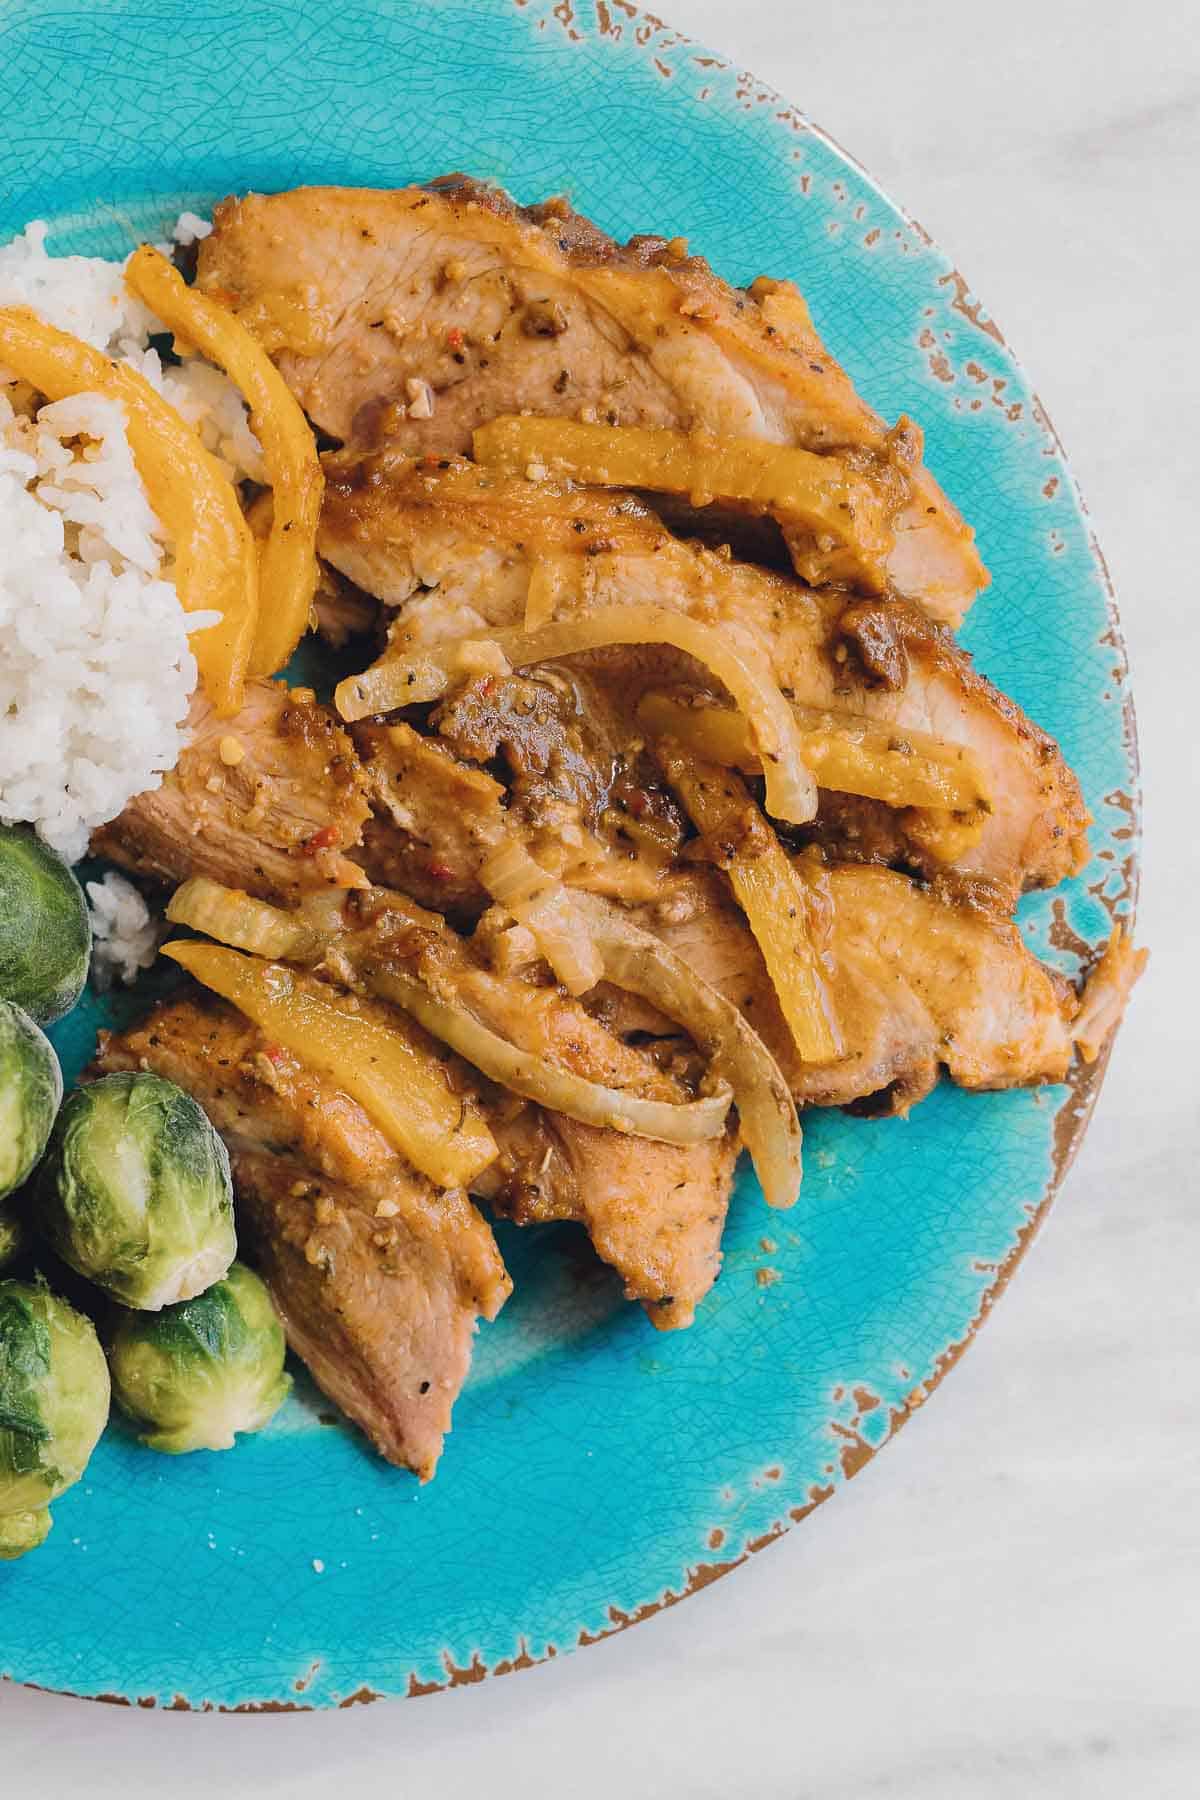 It’s time to dress up in peg legs and eye patches, because this Caribbean Pork Roast will have the whole family shouting “shiver me timbers” when they taste the complex, vibrant, and almost out of this world flavors that meld together perfectly in this dish. 